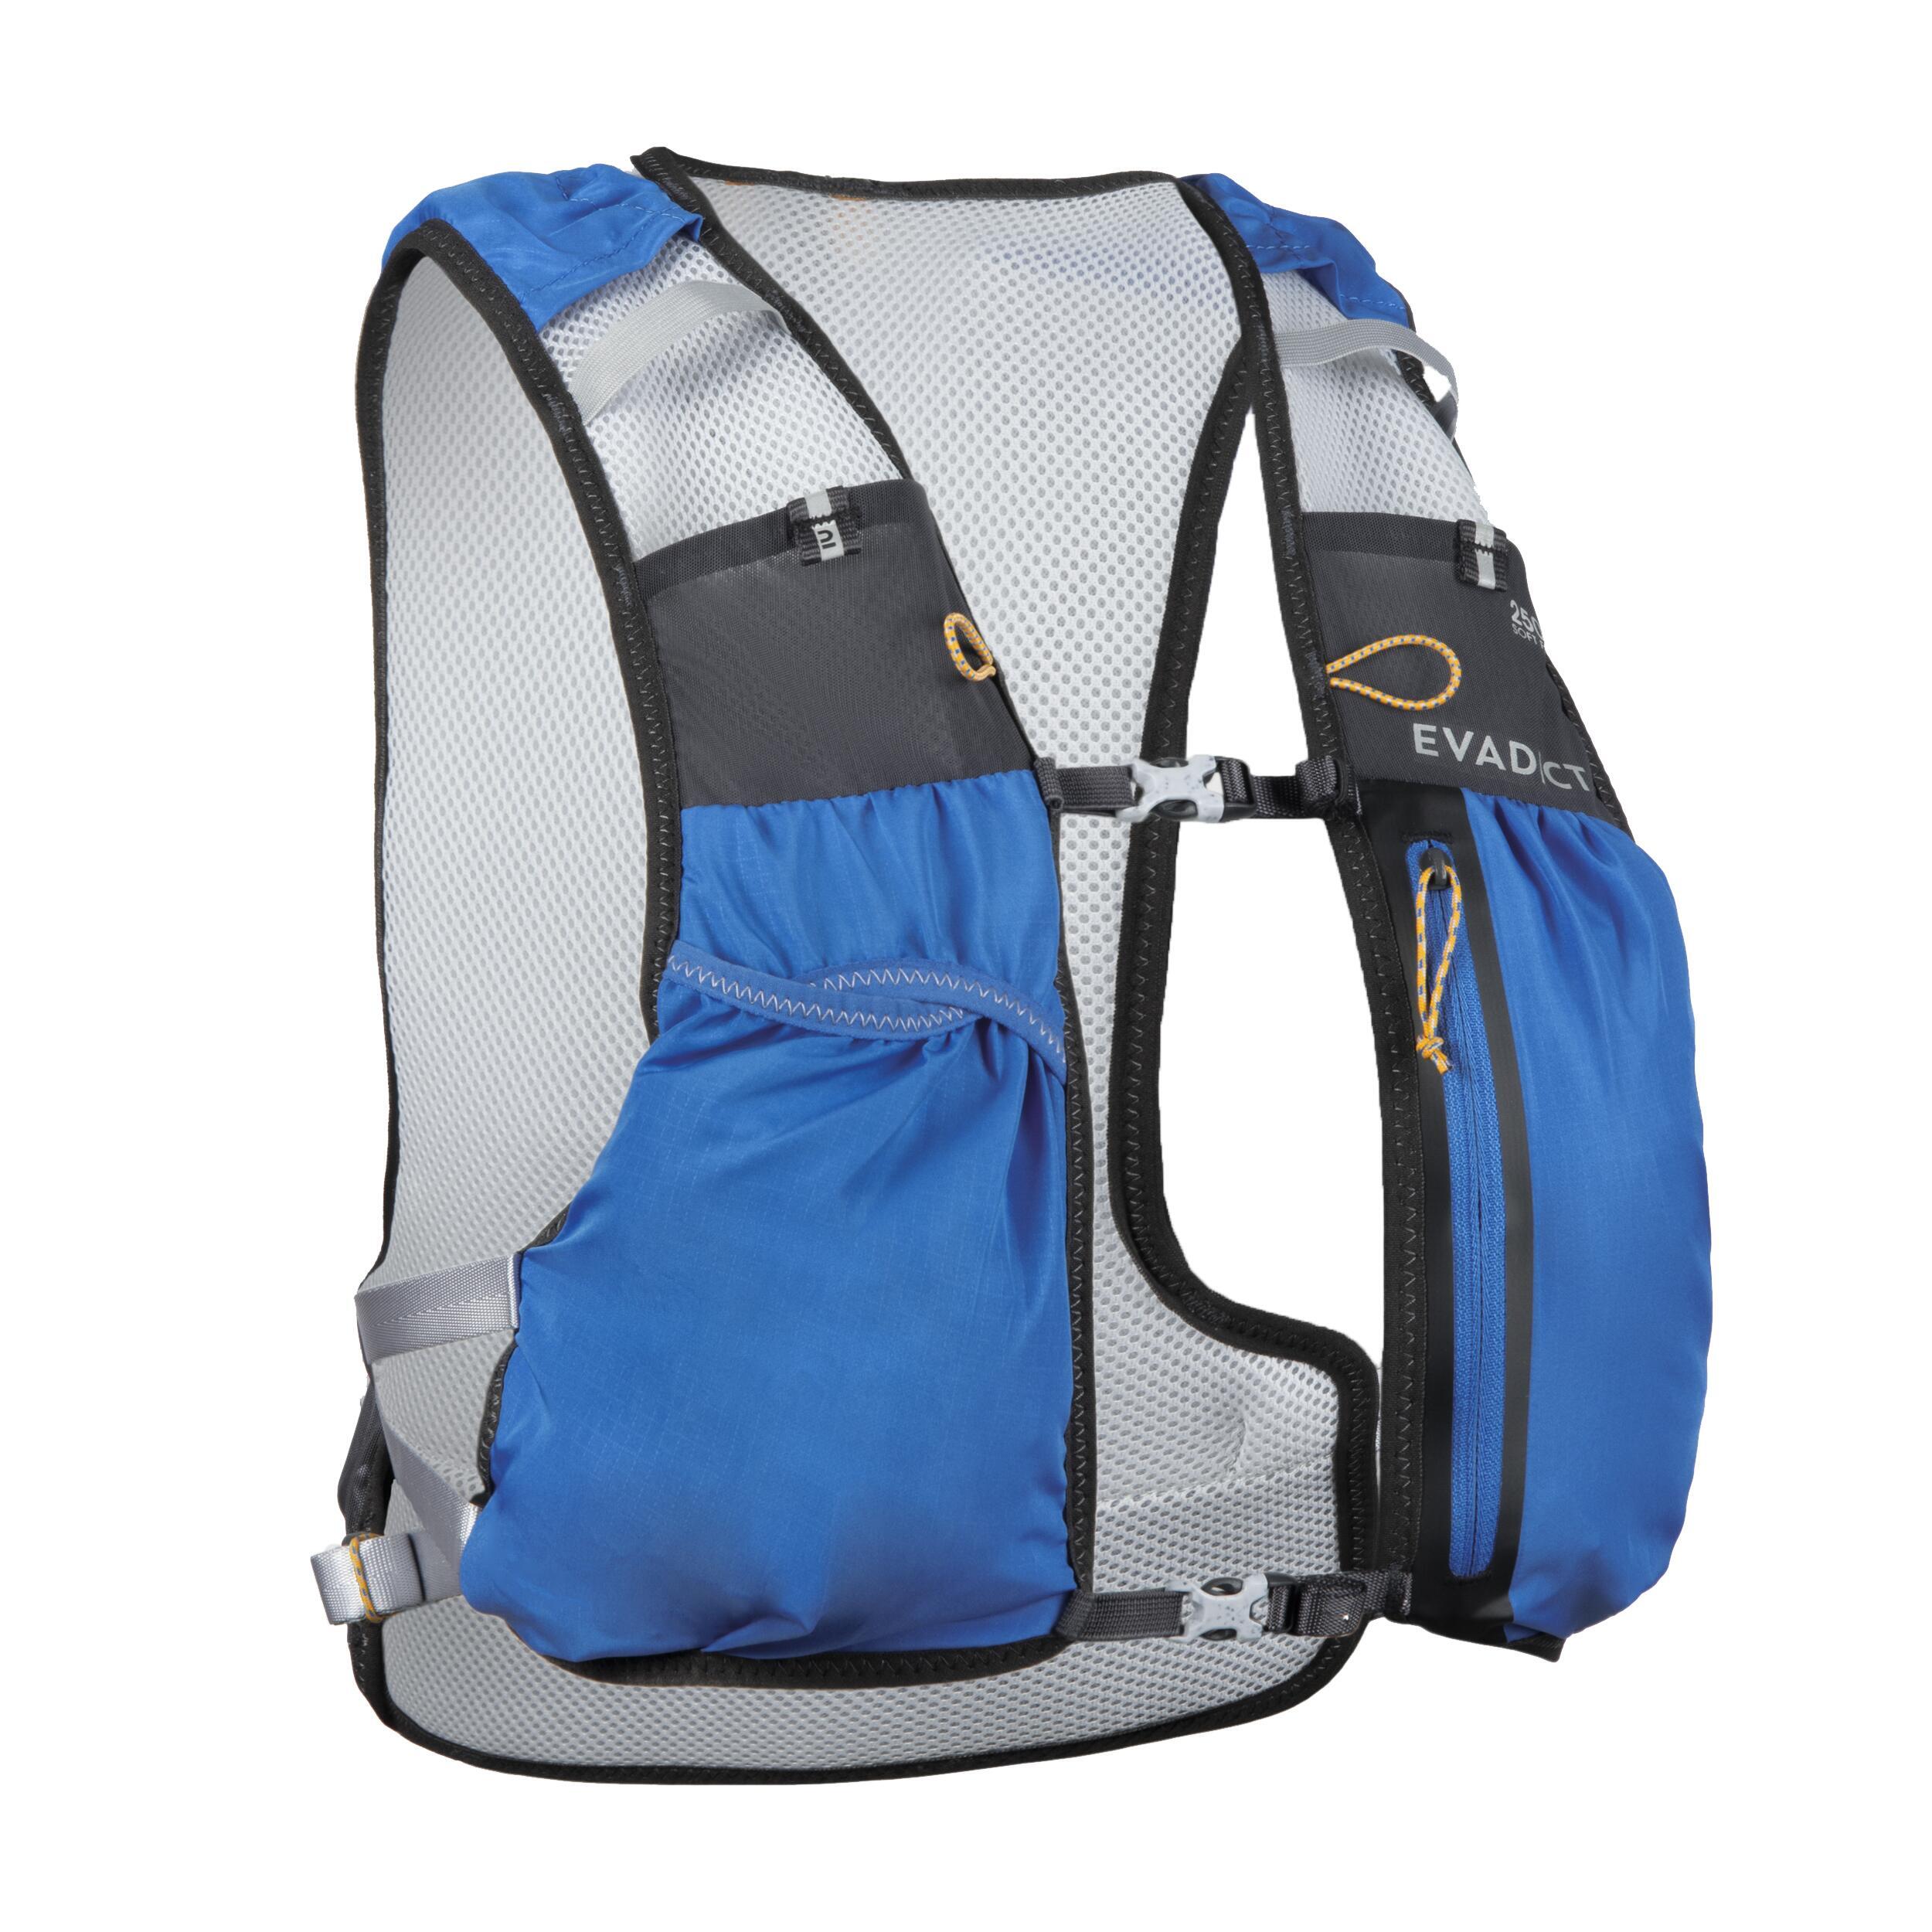 5L TRAIL RUNNING BAG - BLUE - SOLD WITH 1L WATER BLADDER 2/12